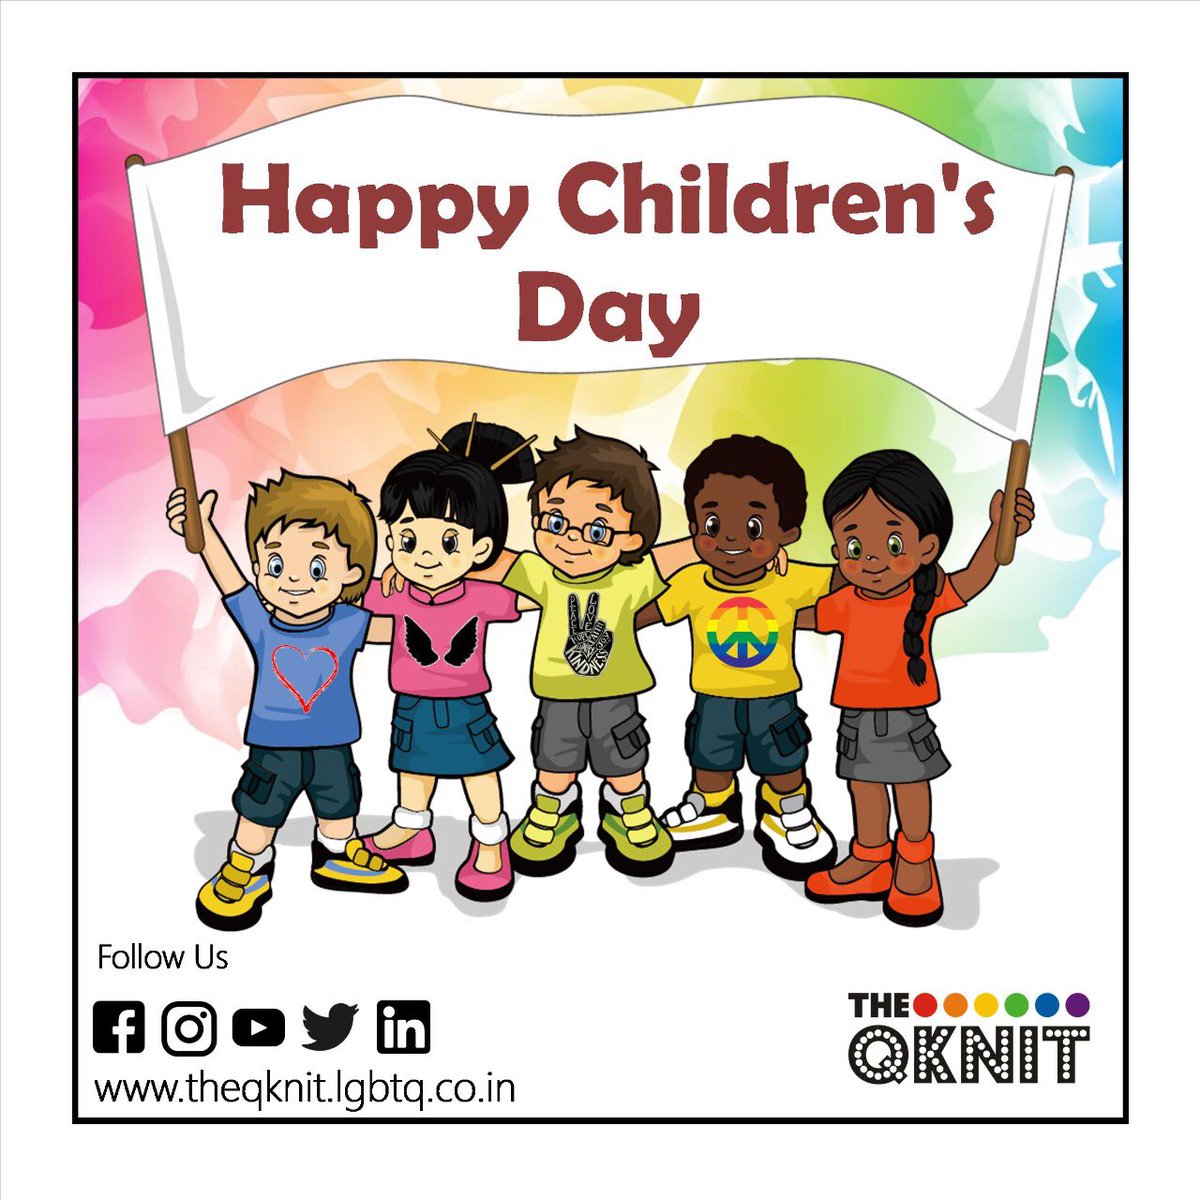 Children are like the colours of a Rainbow. Bright and Colourful!! Happy Children’s Day.

#theqknit #queersamachar #childrensday #childrensday2019 #celebration #celebrationoflife #celebratechildhood #queer #lgbtqia #lgbt #supportchildren #supportchildeducation #spreadlove